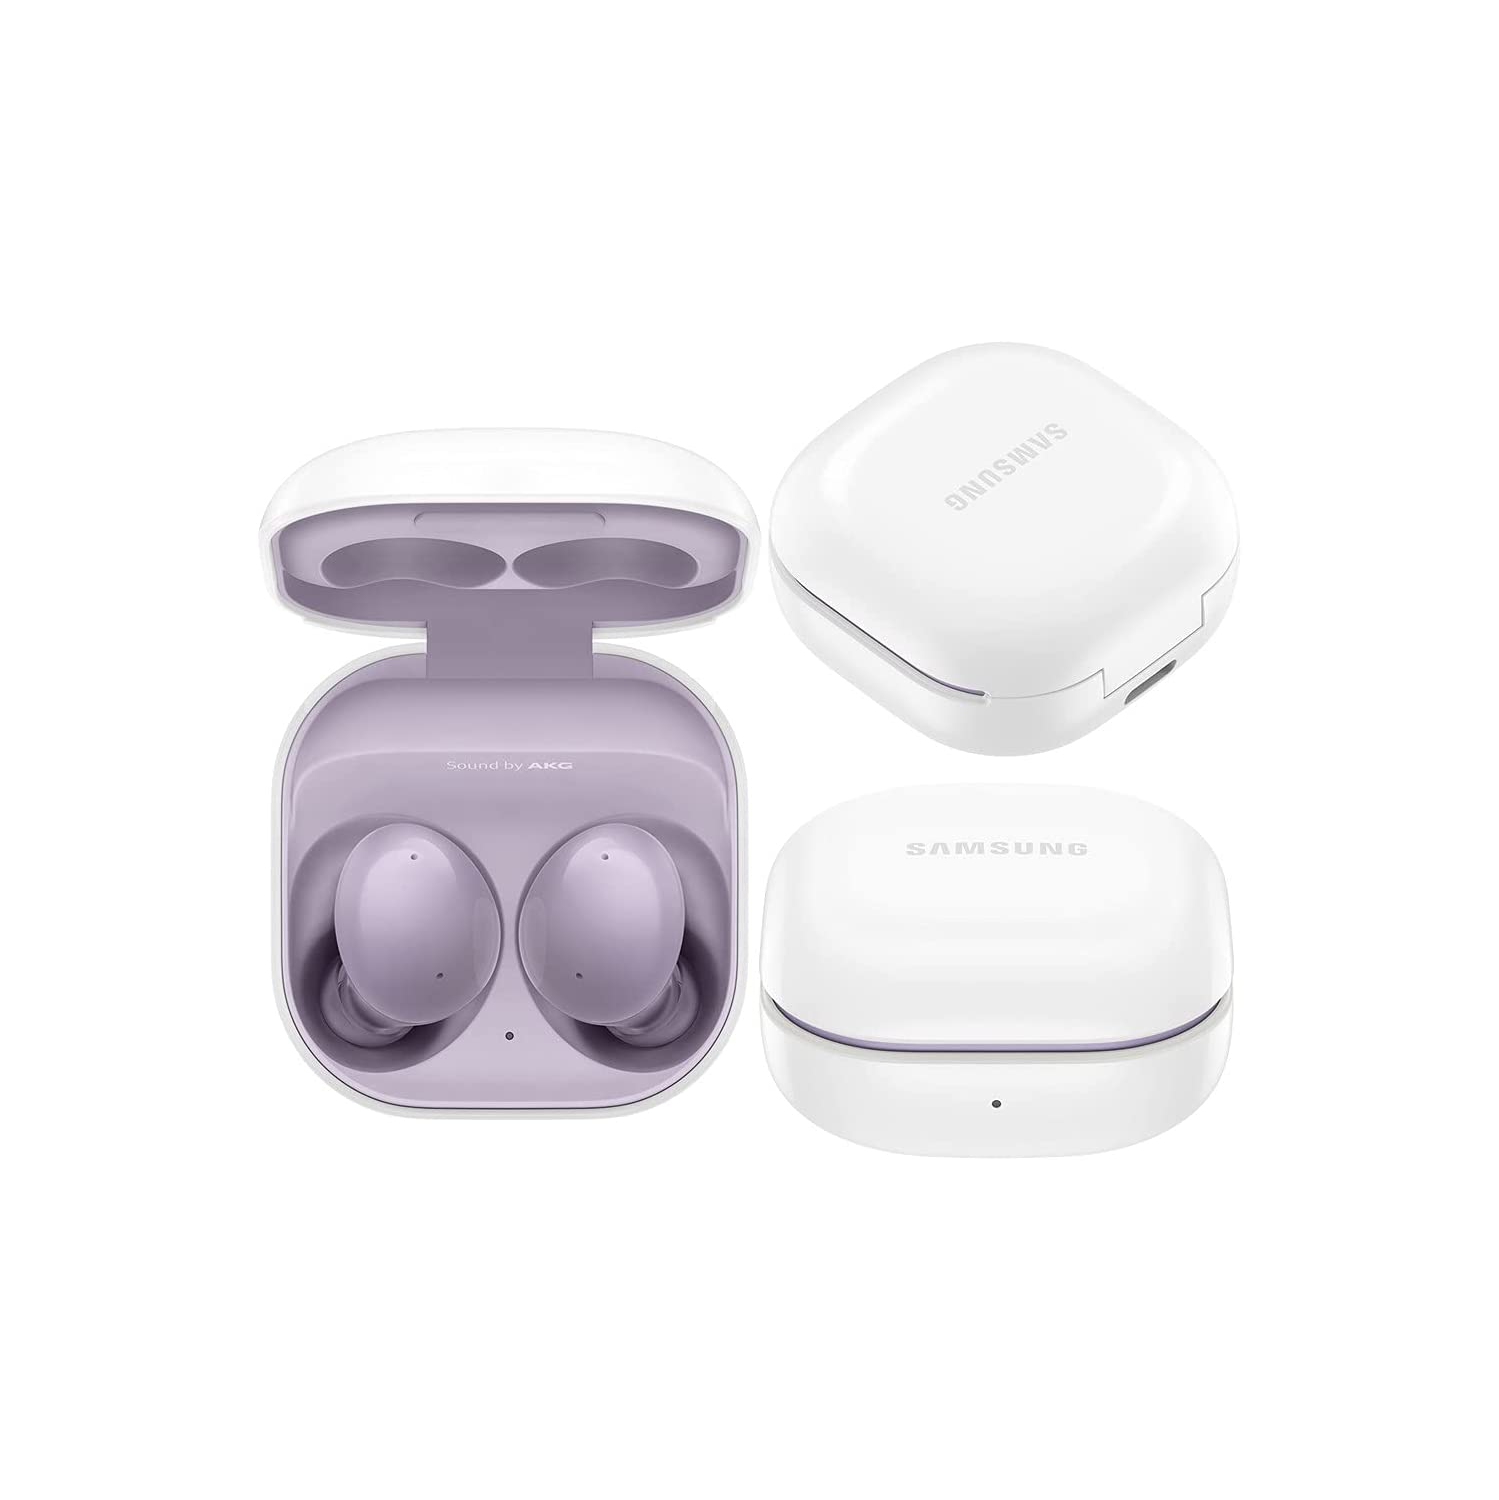 SAMSUNG Galaxy Buds 2 True Wireless Earbuds Noise Cancelling Ambient Sound Bluetooth Lightweight Comfort Fit Touch Control (Lavender)